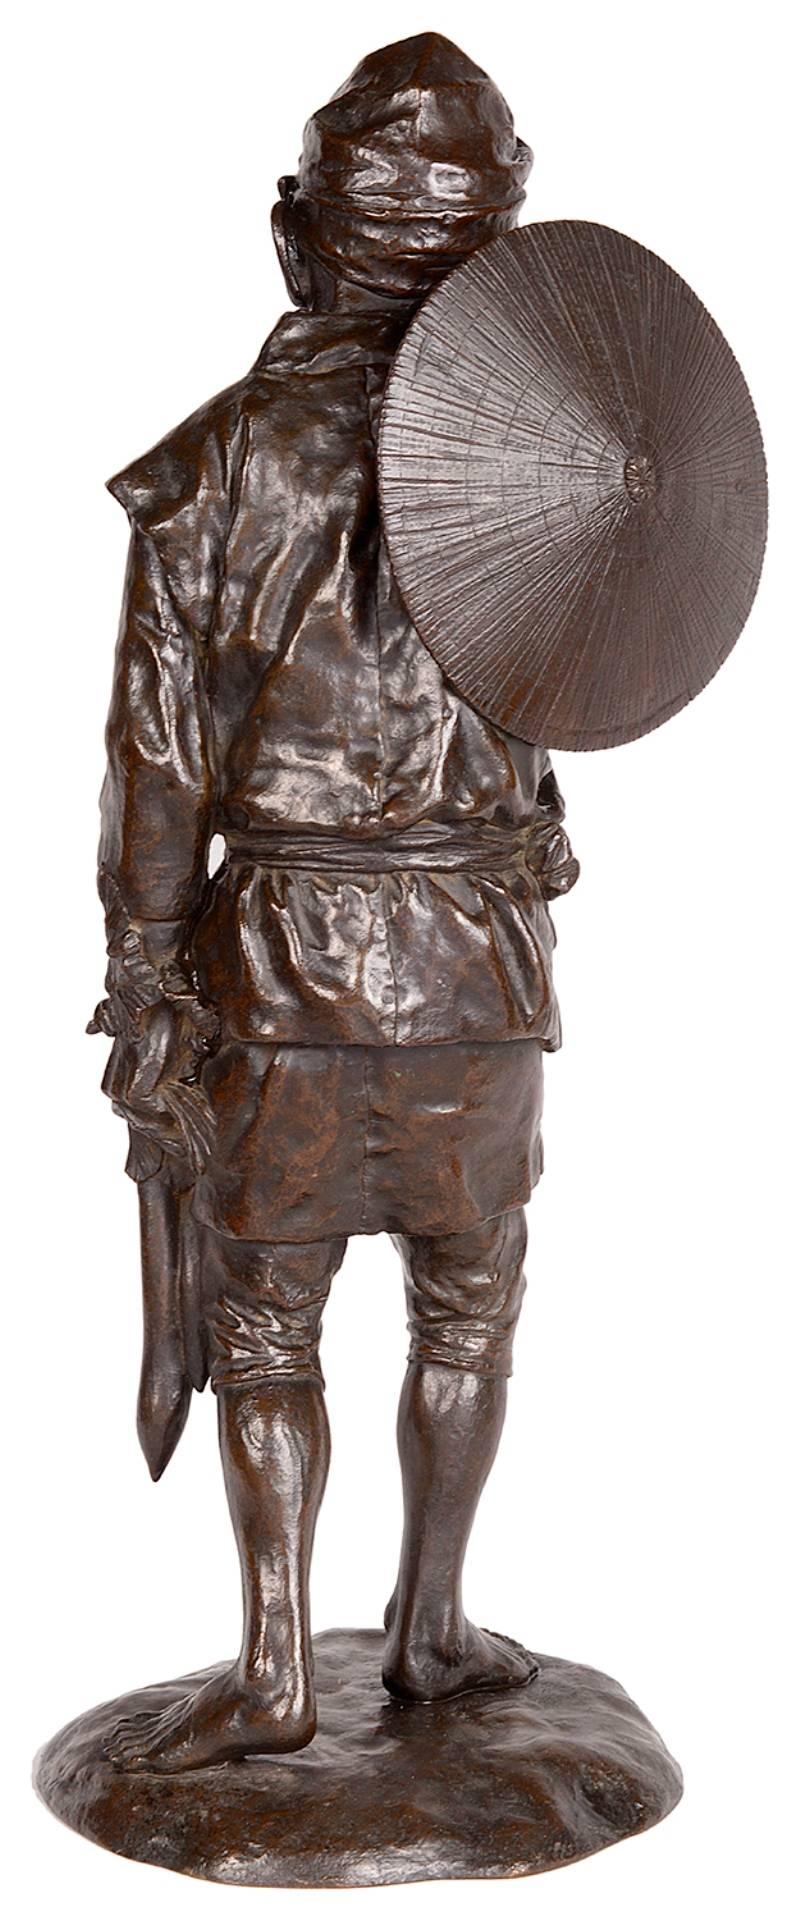 A fine quality, late 19th century (Meiji period 1868-1912) Japanese bronze statue of a farmer. Wearing a Sedge hat and carry his crop of daikon (Winter Radish).